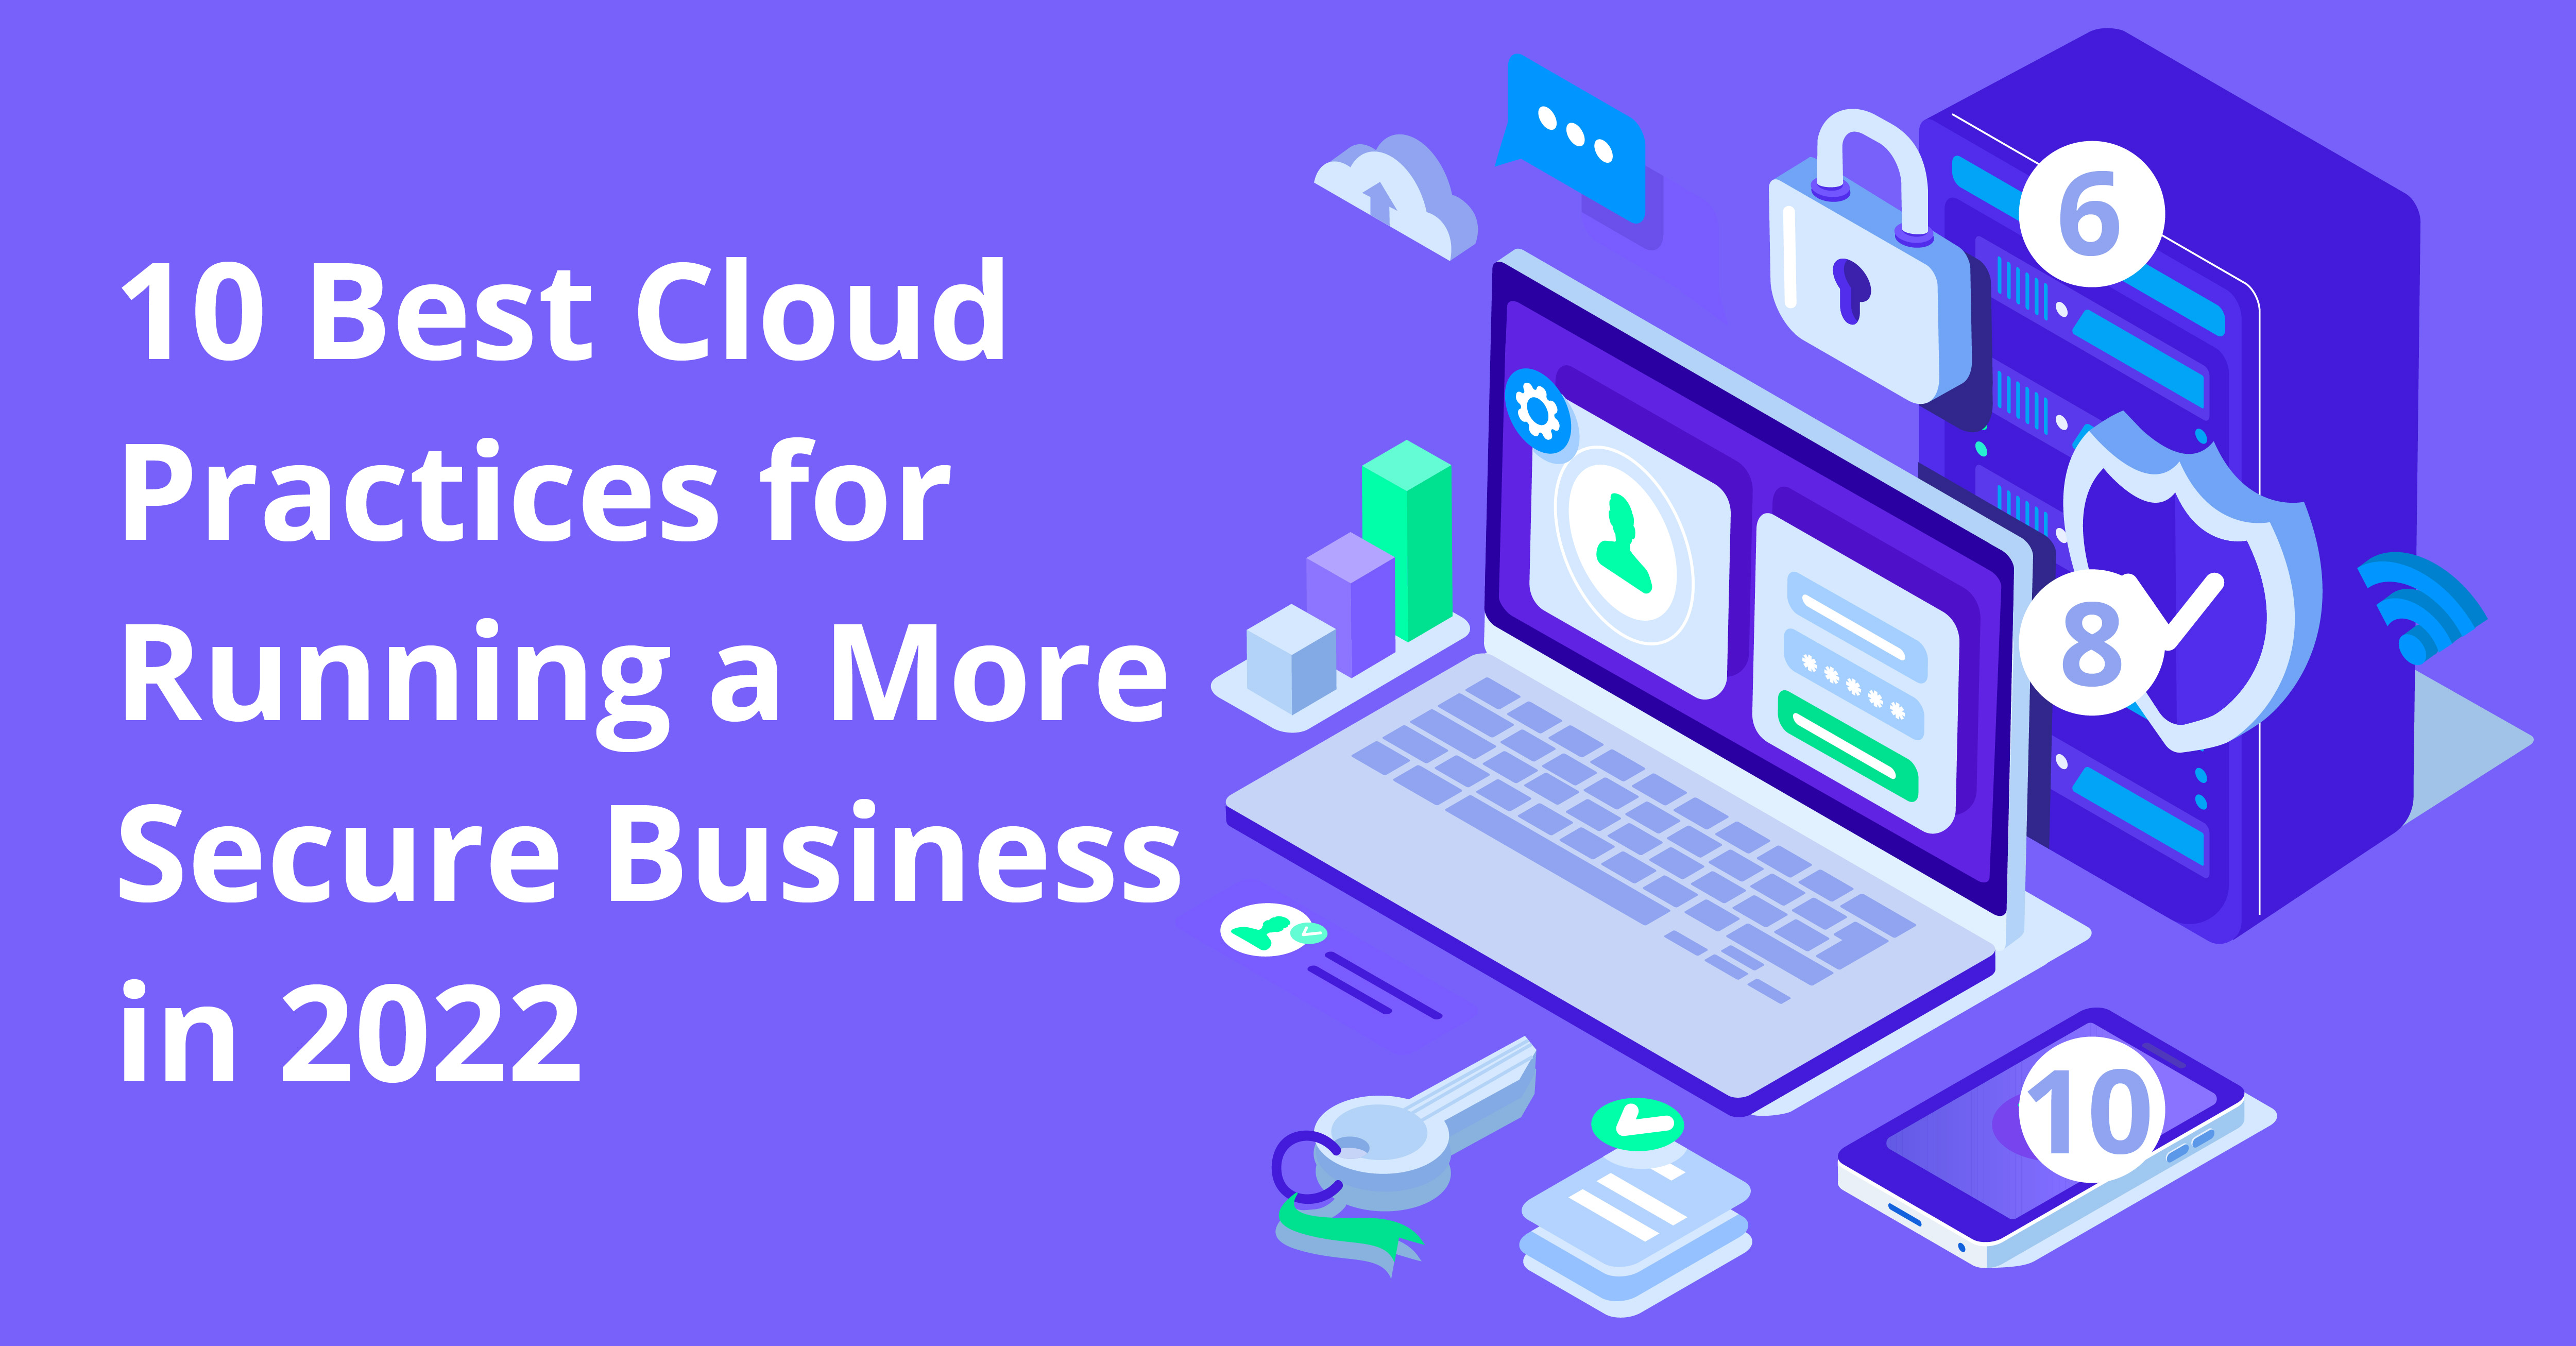 10 Best Cloud Practices for Running a More Secure Business in 2022